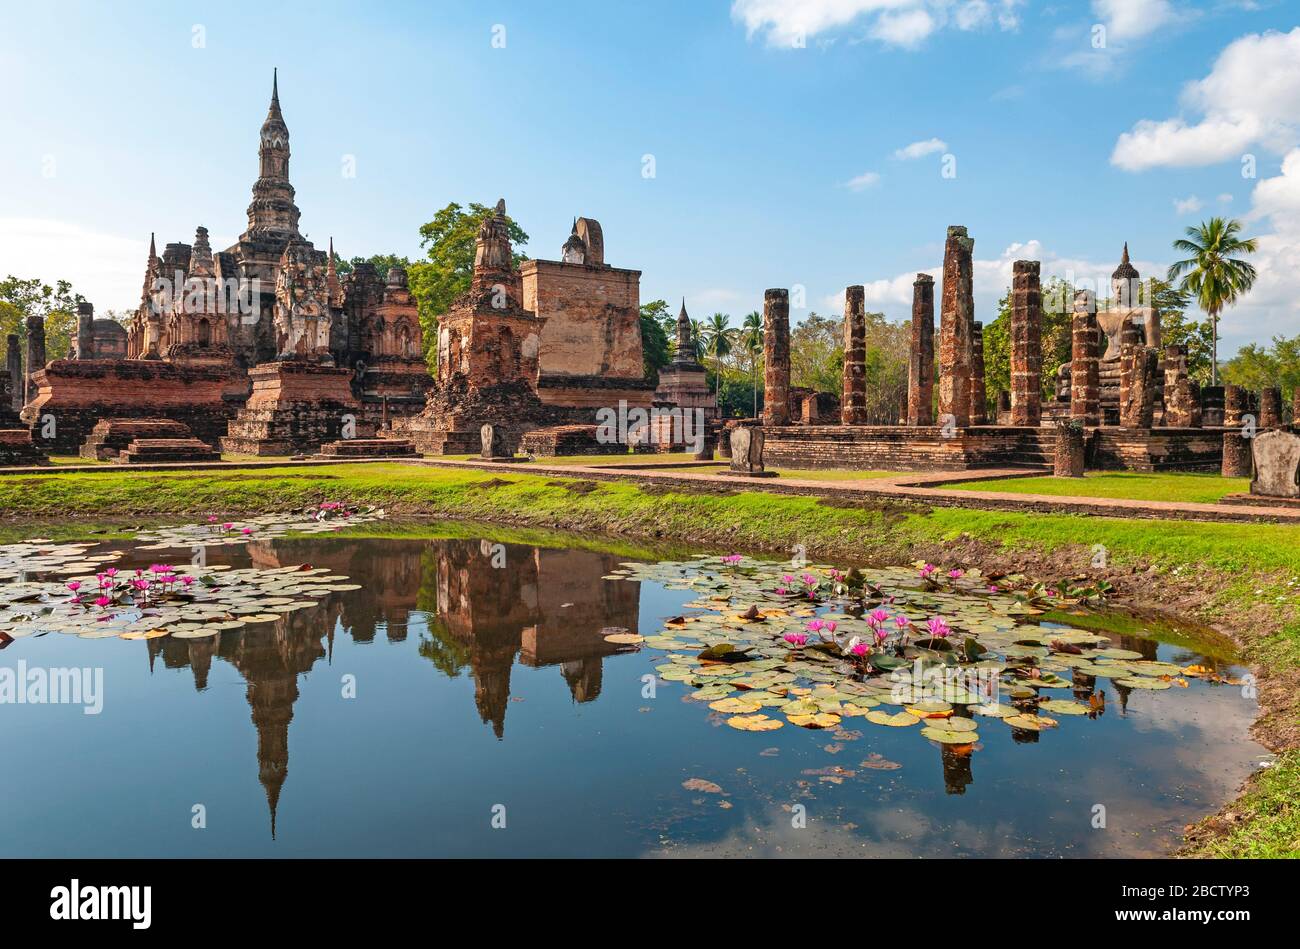 The Wat Mahathat temple reflecting in a pond with lotus flowers, Sukhothai, Thailand. Stock Photo